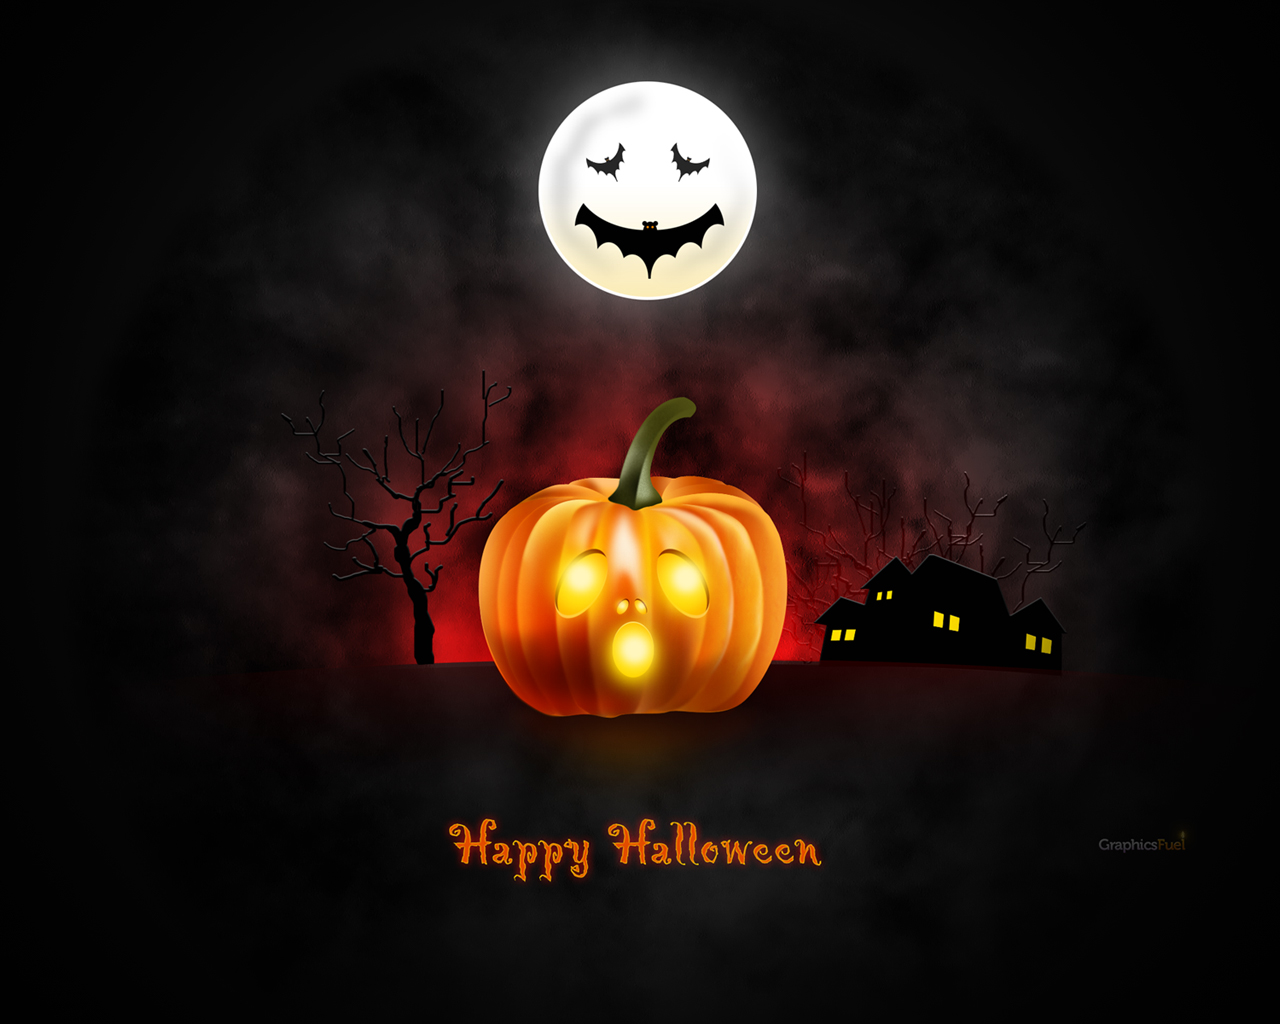 Halloween Wallpaper For Desktop iPad iPhone Psd Icons Included